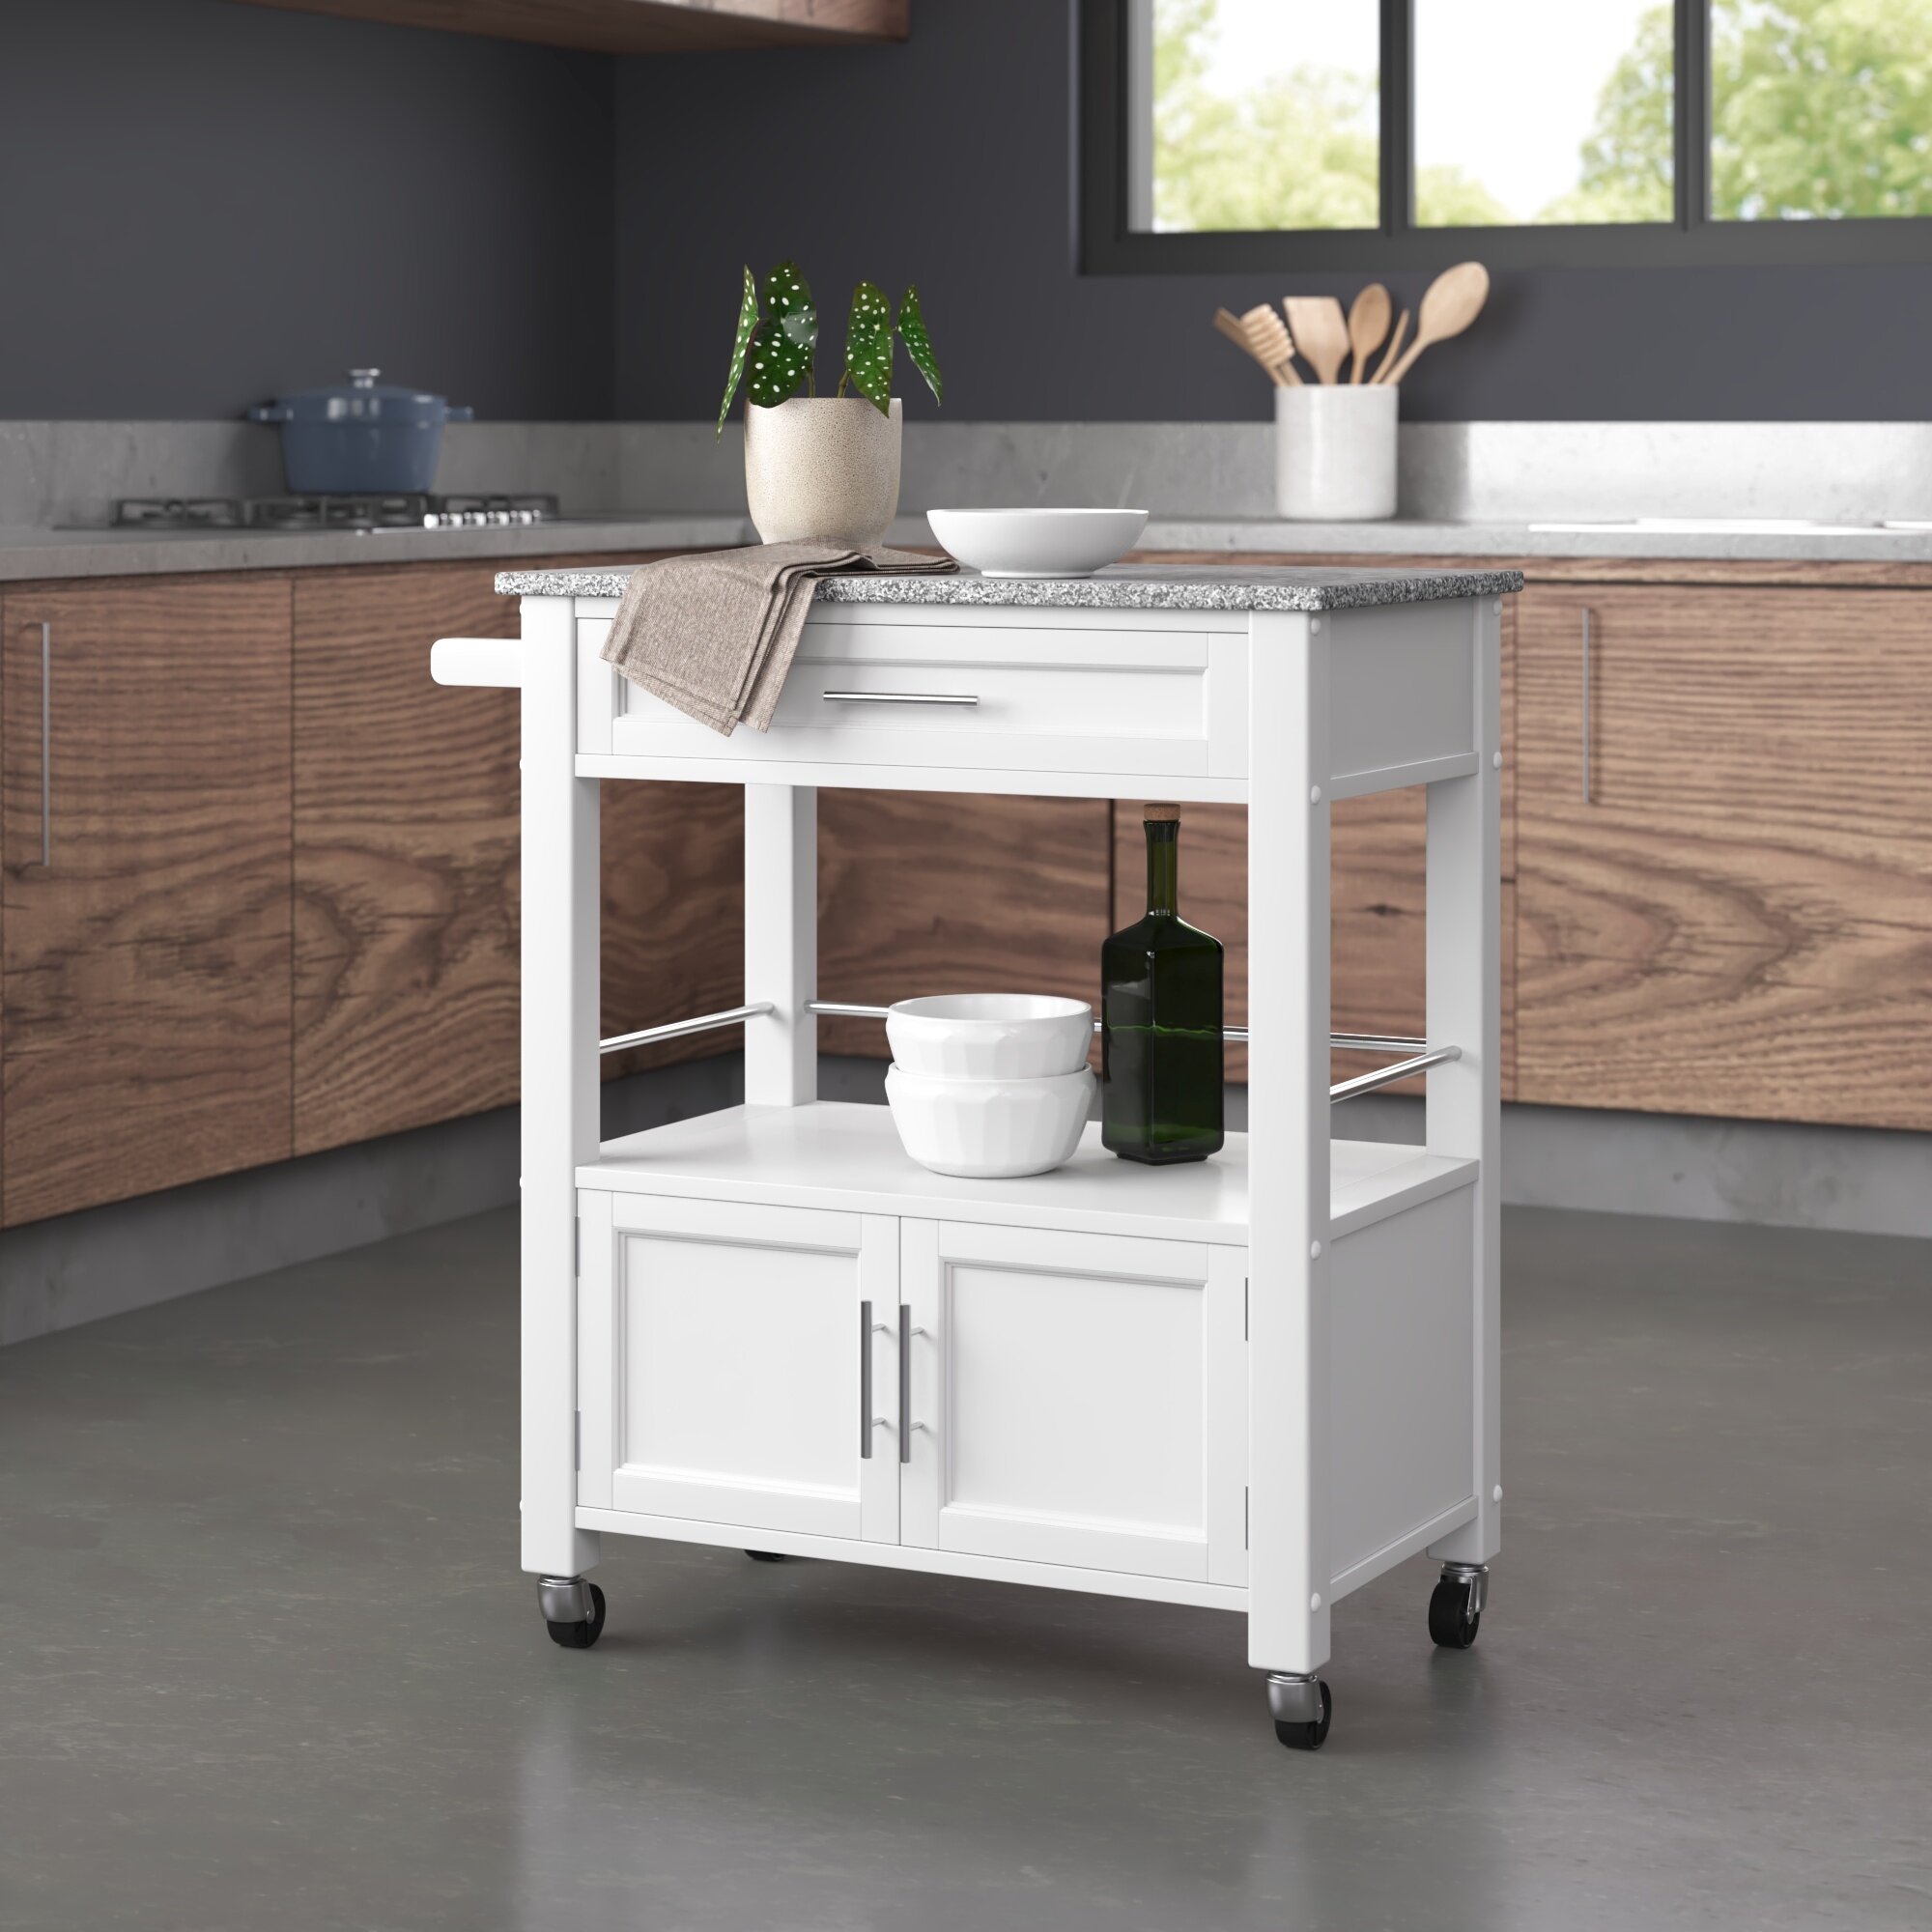 Ager Granite Top Kitchen Cart With Storage Space 